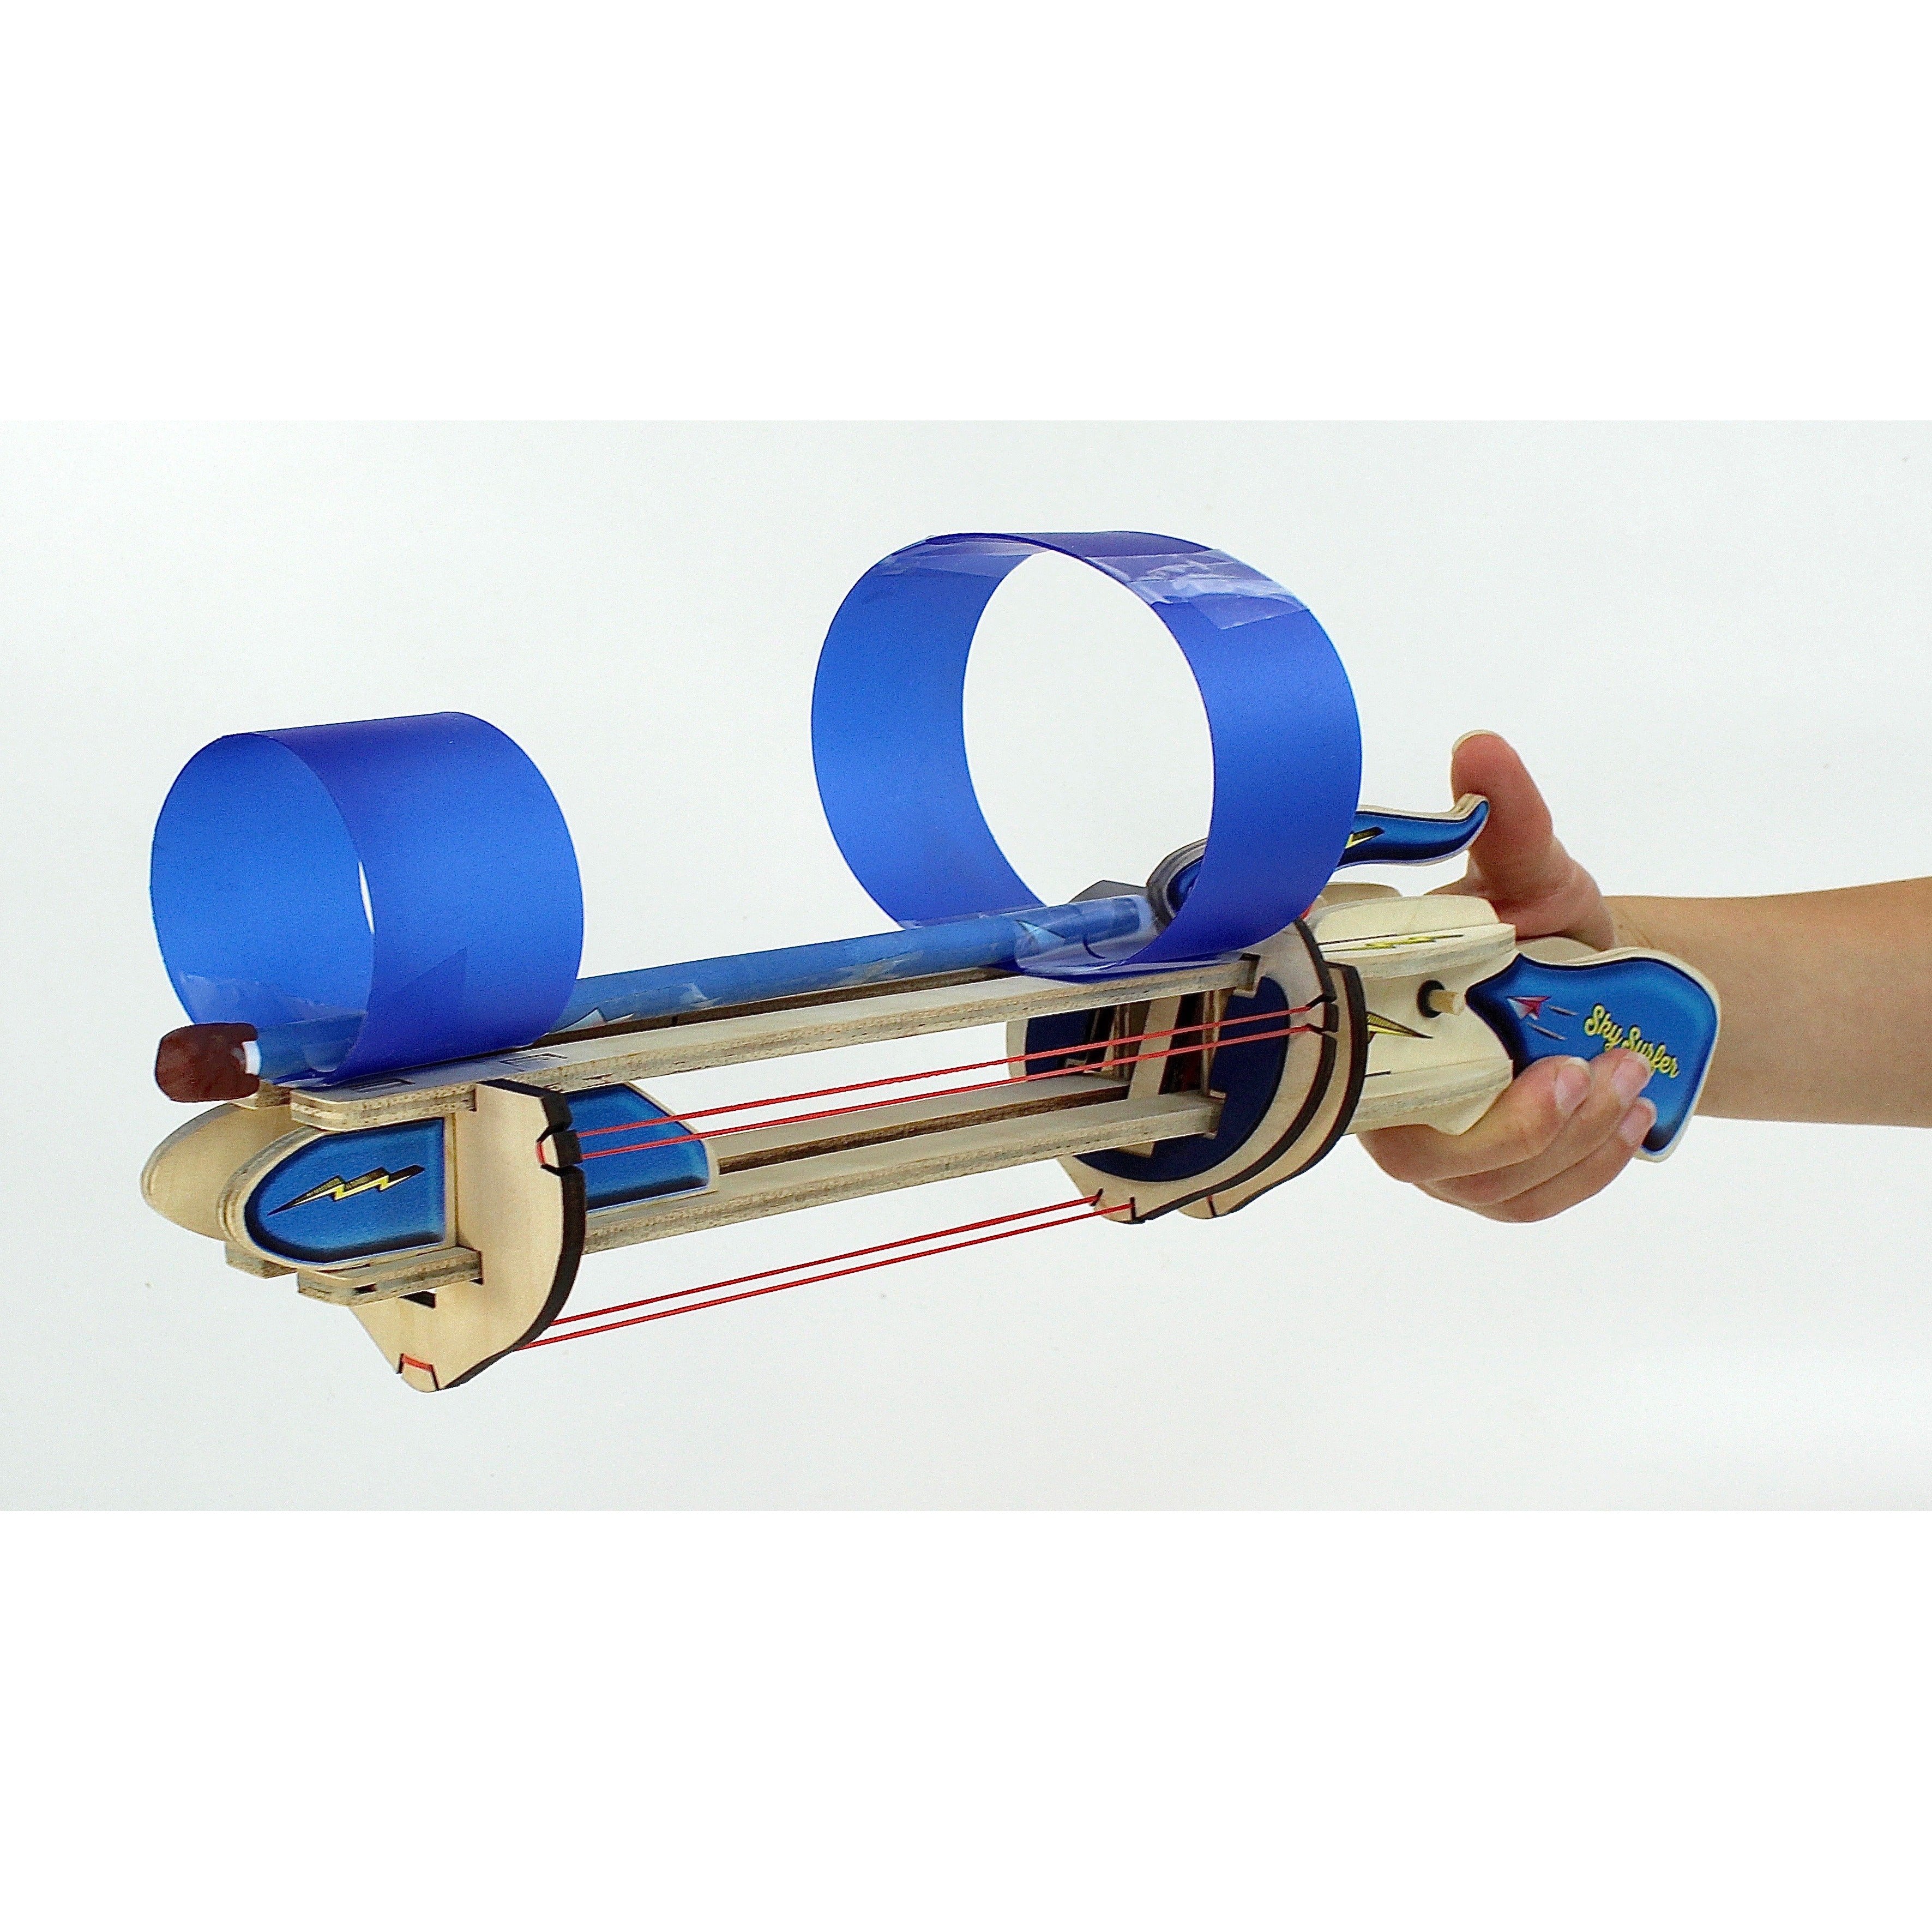 Pathfinders Sky Surfer Airplane Launcher